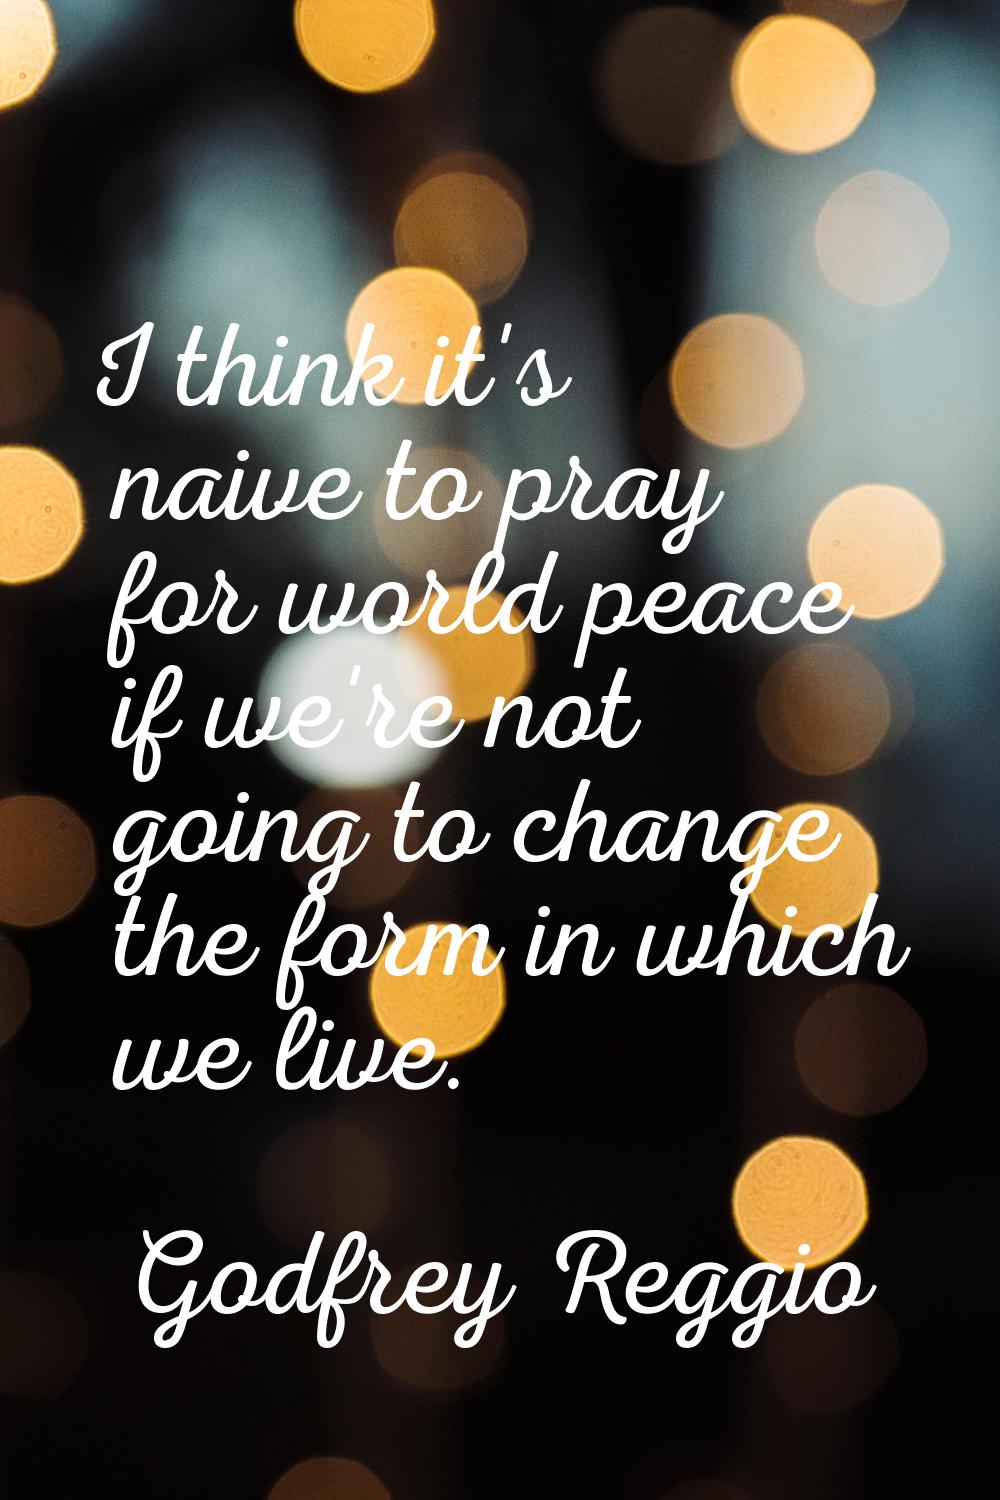 I think it's naive to pray for world peace if we're not going to change the form in which we live.